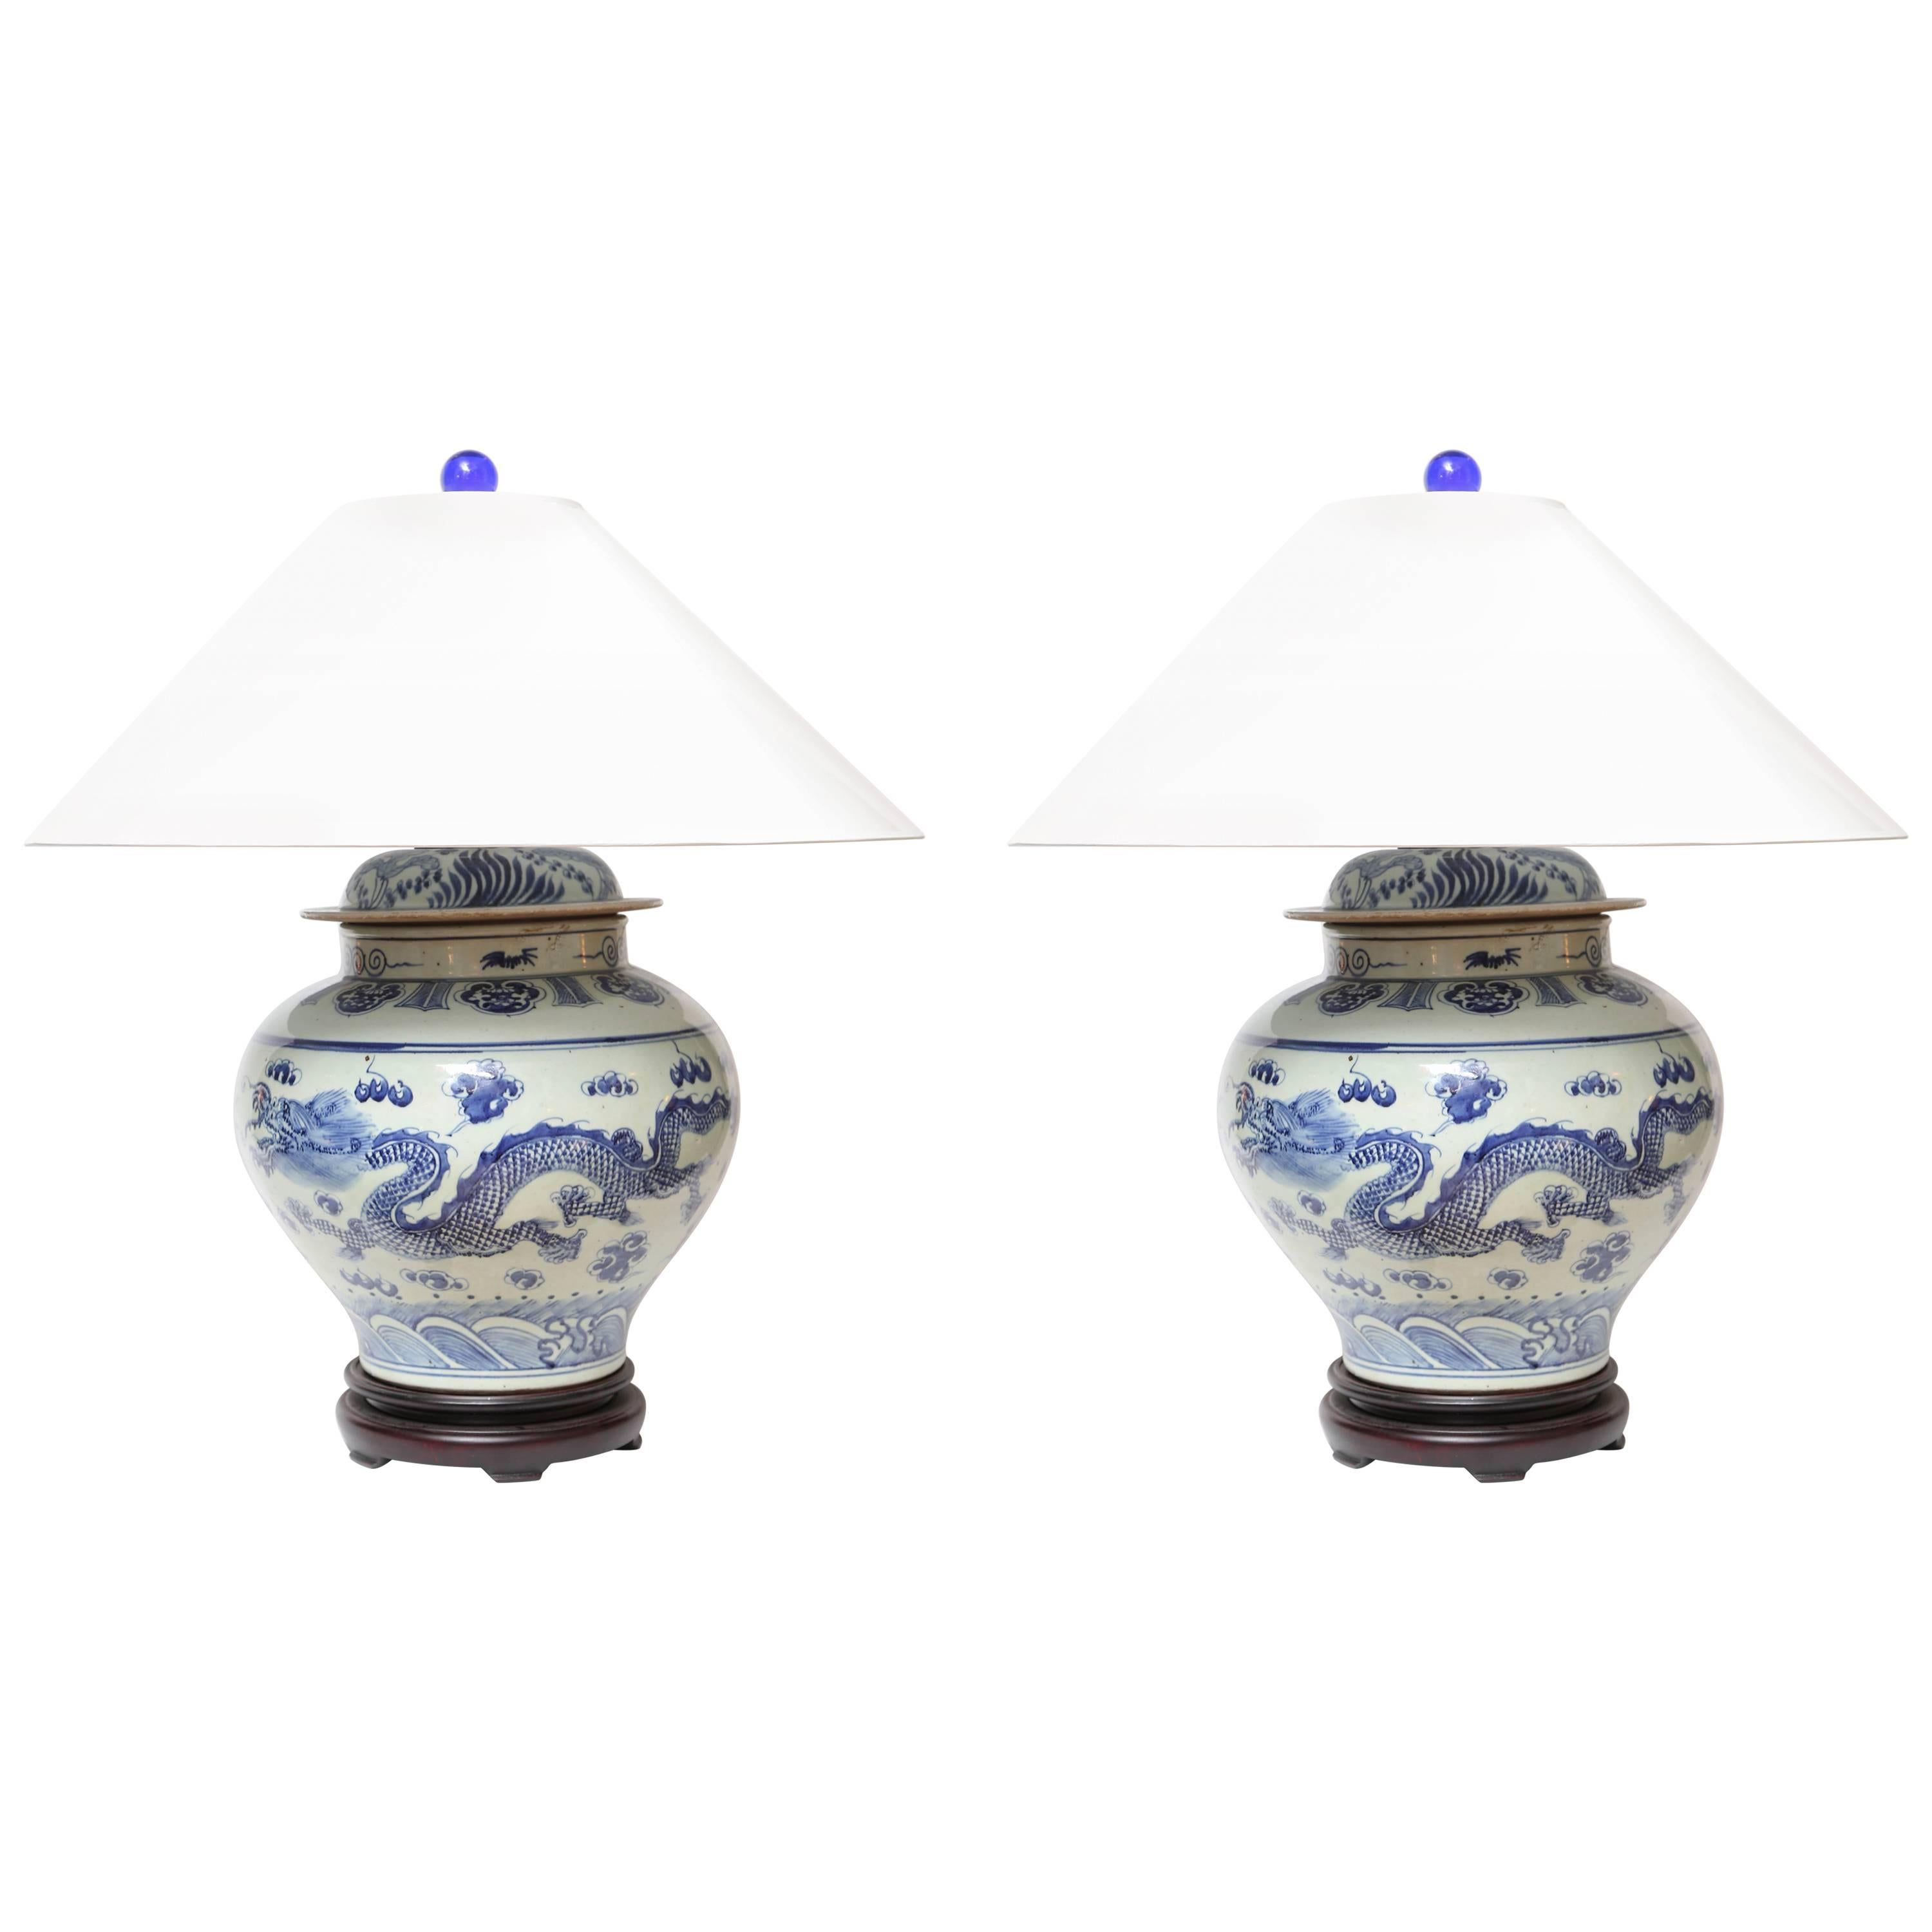 Superb 1940s Dragons Table Lamps with White Shades